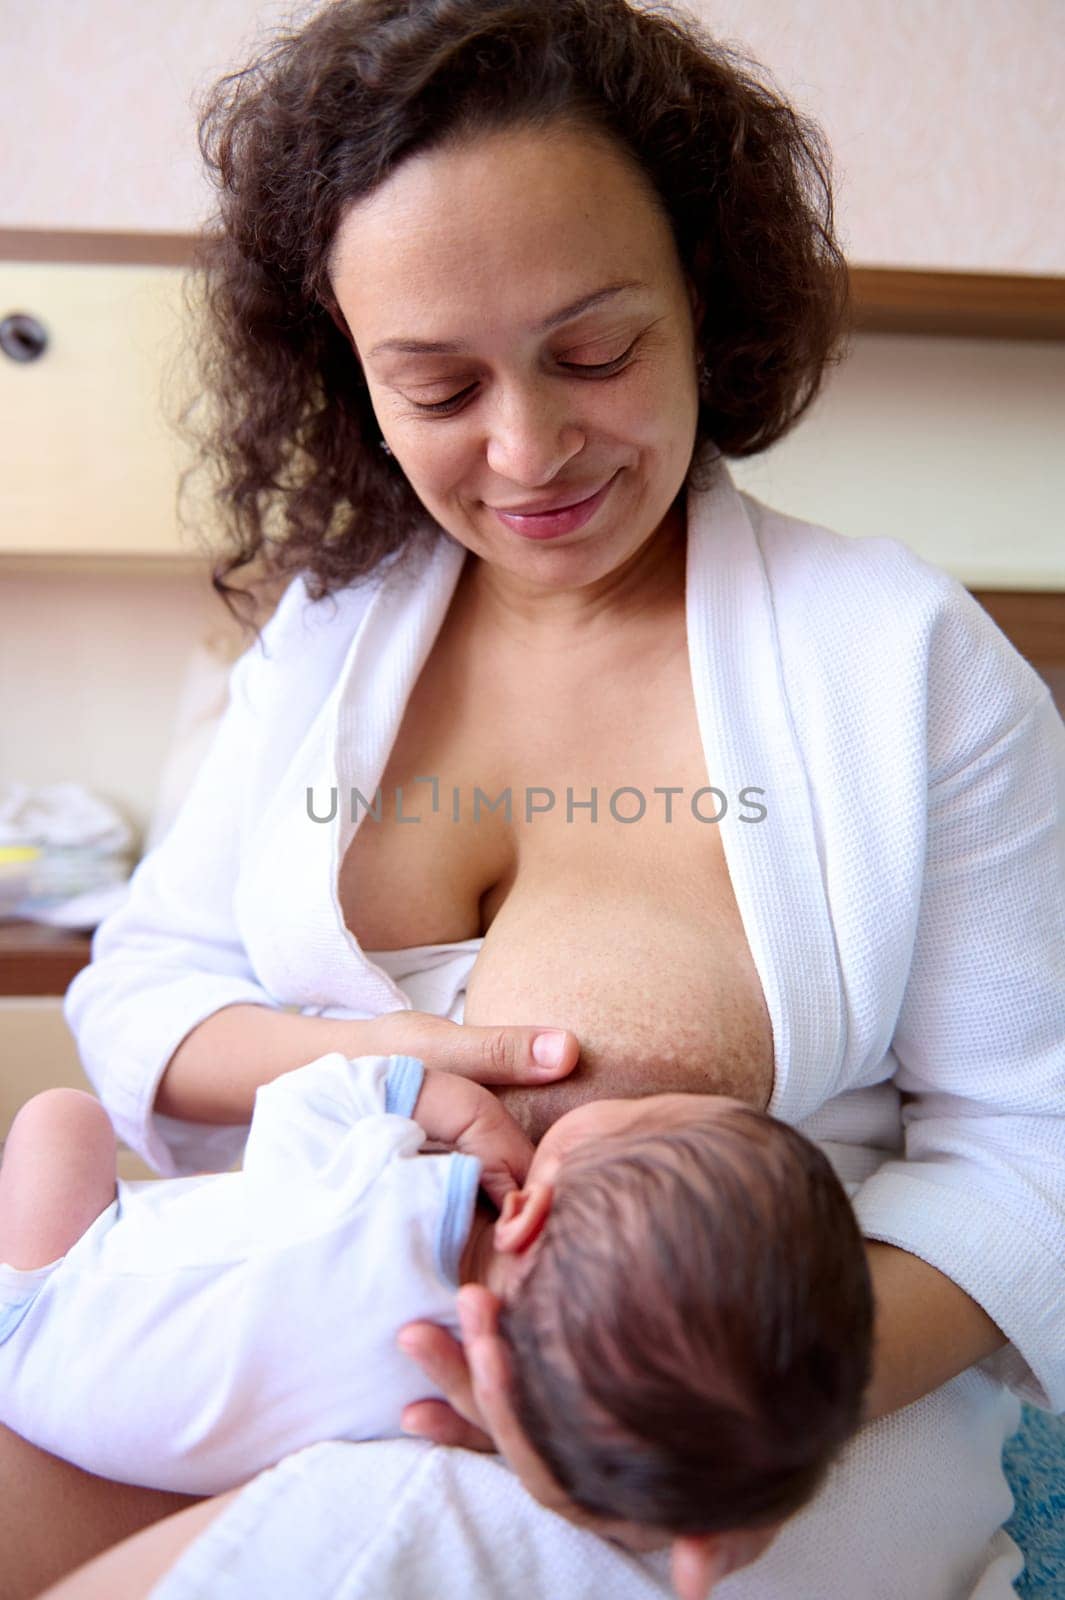 Young curly haired multi ethnic woman mother holding and breastfeeding her newborn baby. Maternity lifestyle by artgf